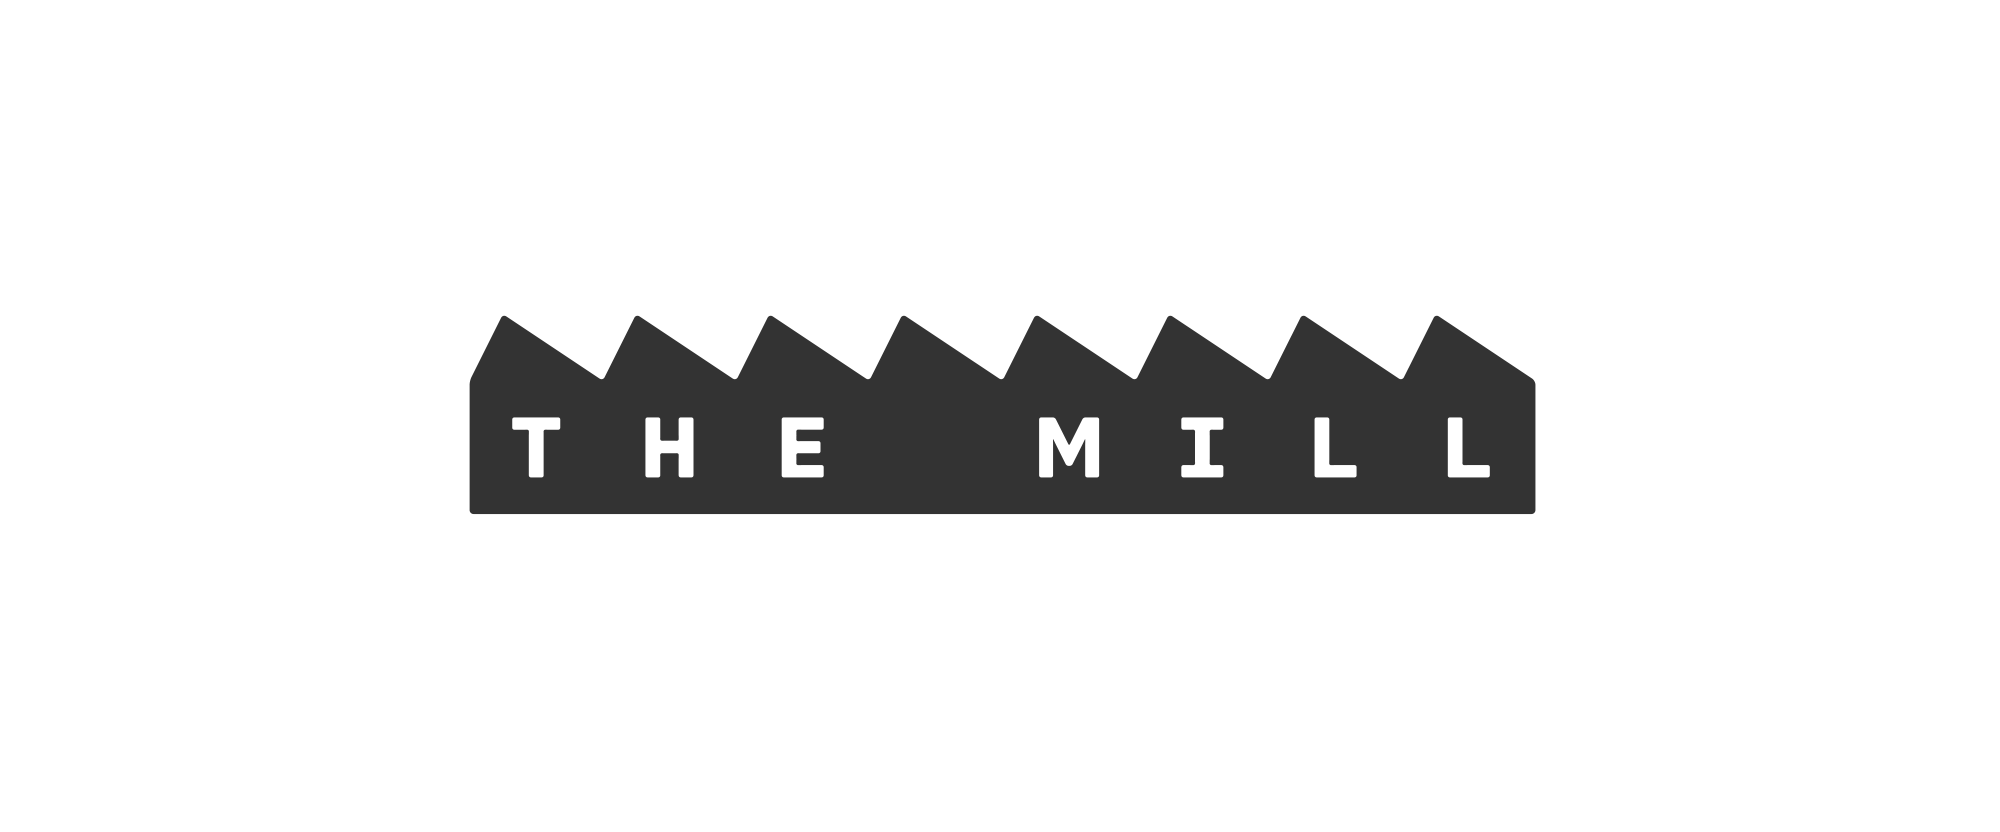 Mill Logo - Brand New: New Logo and Identity for The Mill by UnderConsideration